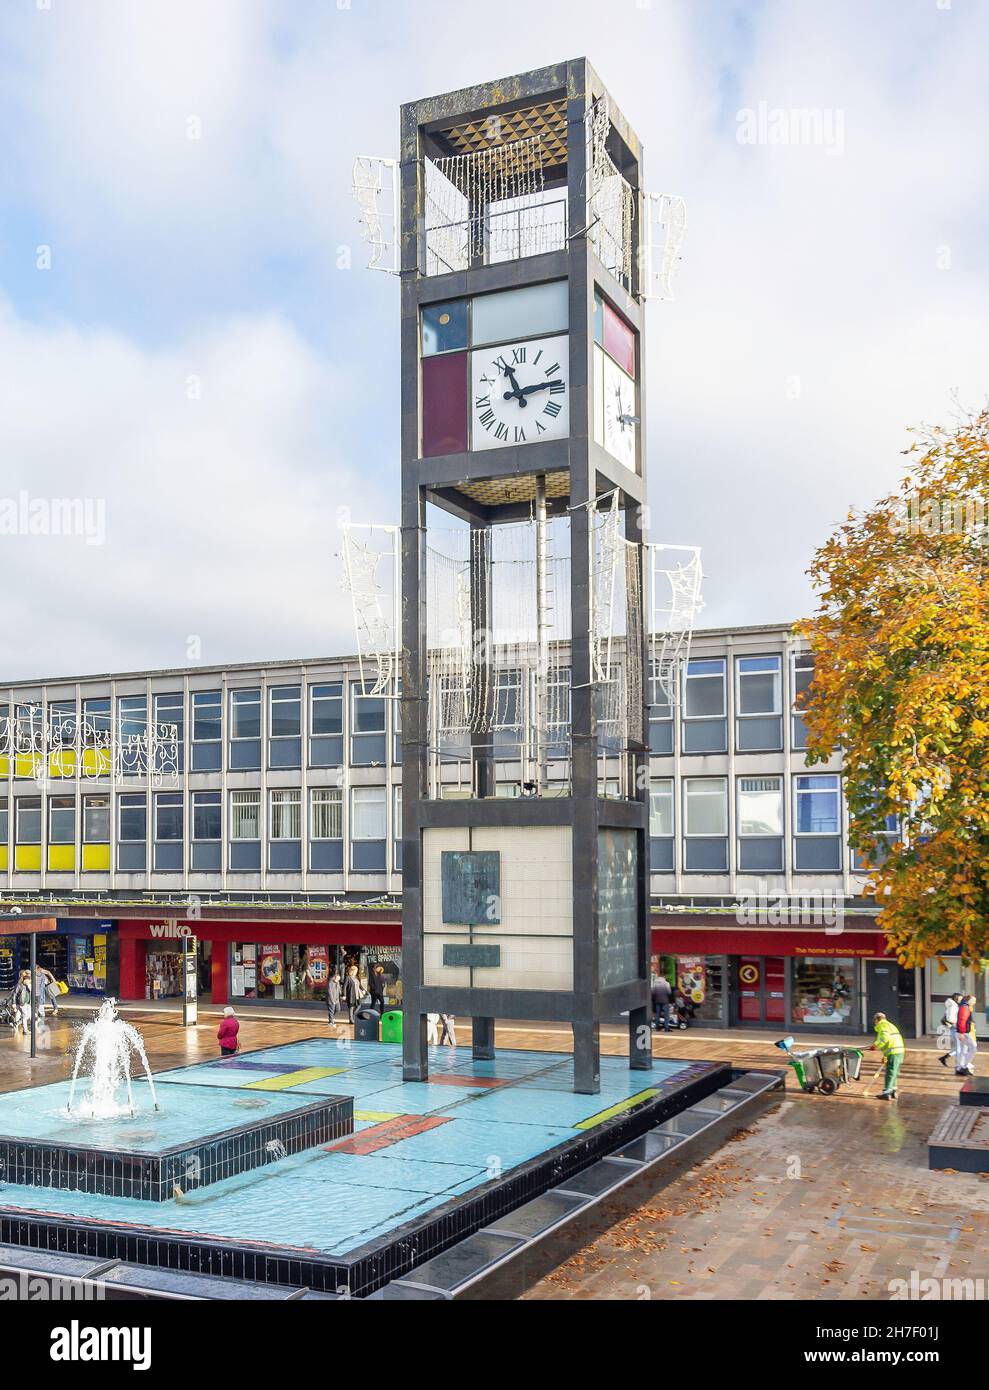 Clock tower and fountain, Town Square, Queensway, Stevenage, Hertfordshire, England, United Kingdom Stock Photo